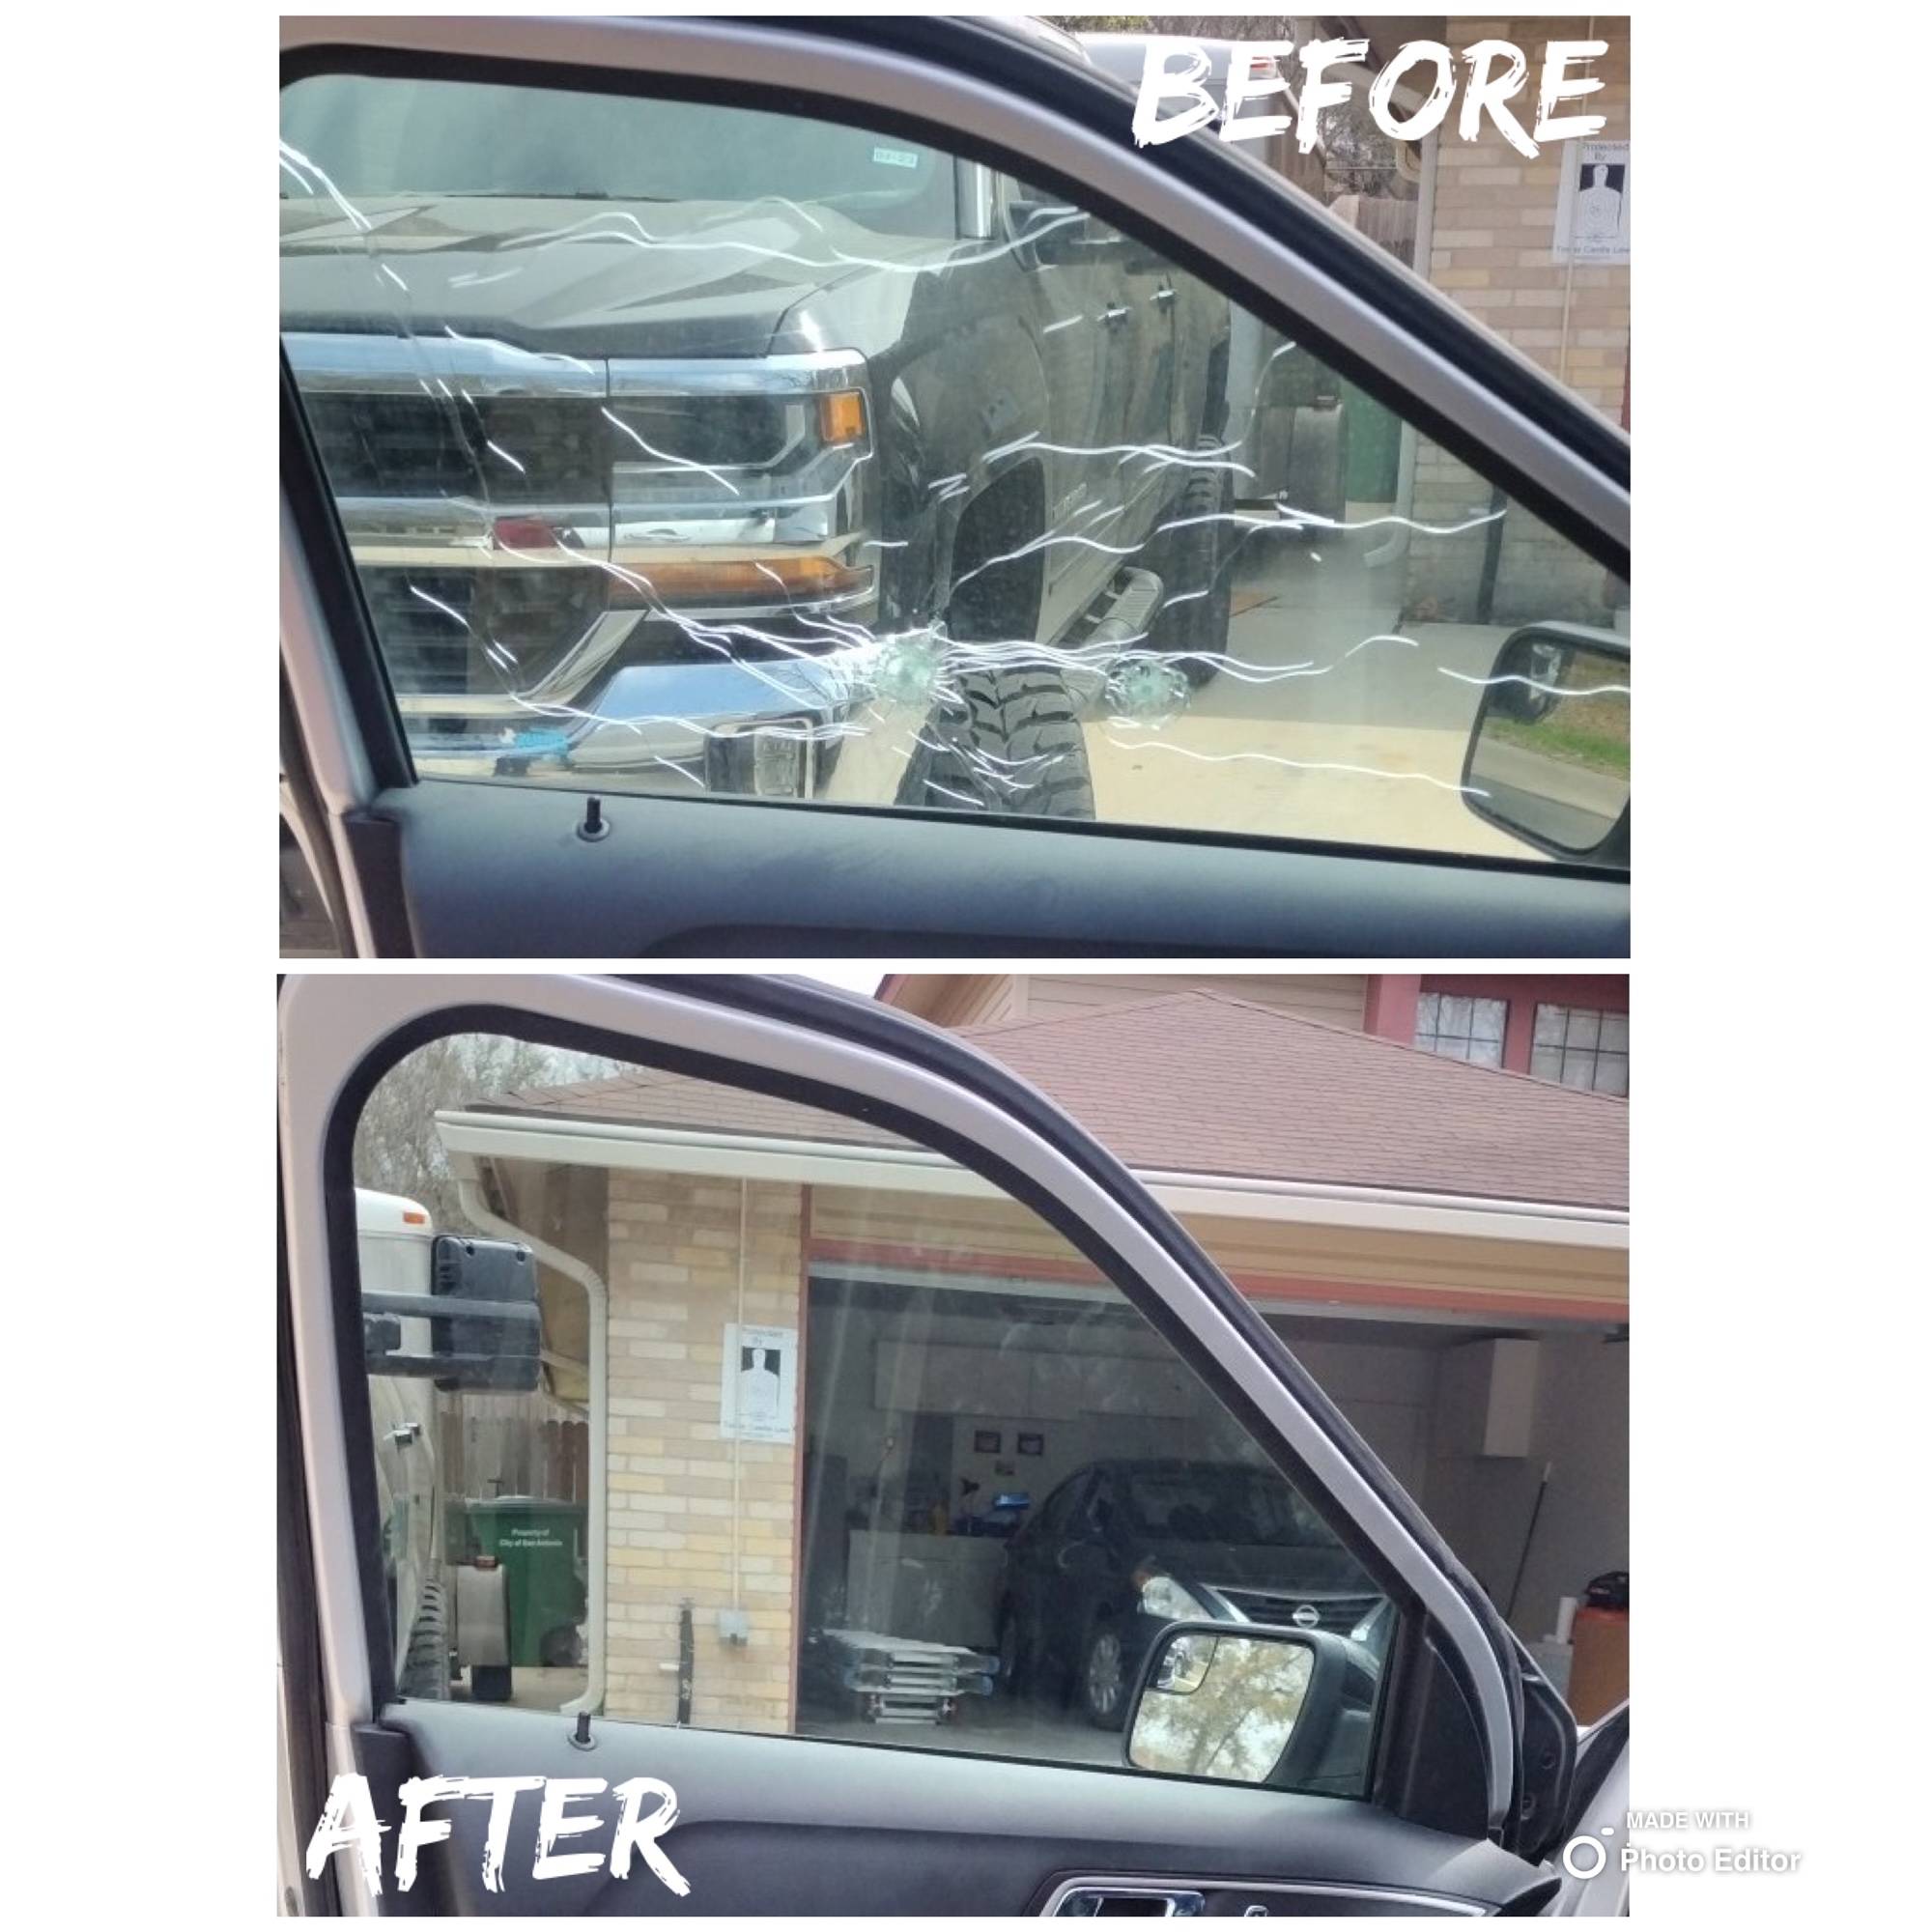 This split image demonstrates the transformation of a van's driver side left front laminated door glass during a home auto glass appointment in Marion, Texas. The top half of the image details the door glass severely cracked as a result of an attempted burglary. In the bottom half, we see the door glass fully replaced and restored, showcasing the expert workmanship involved in the repair.